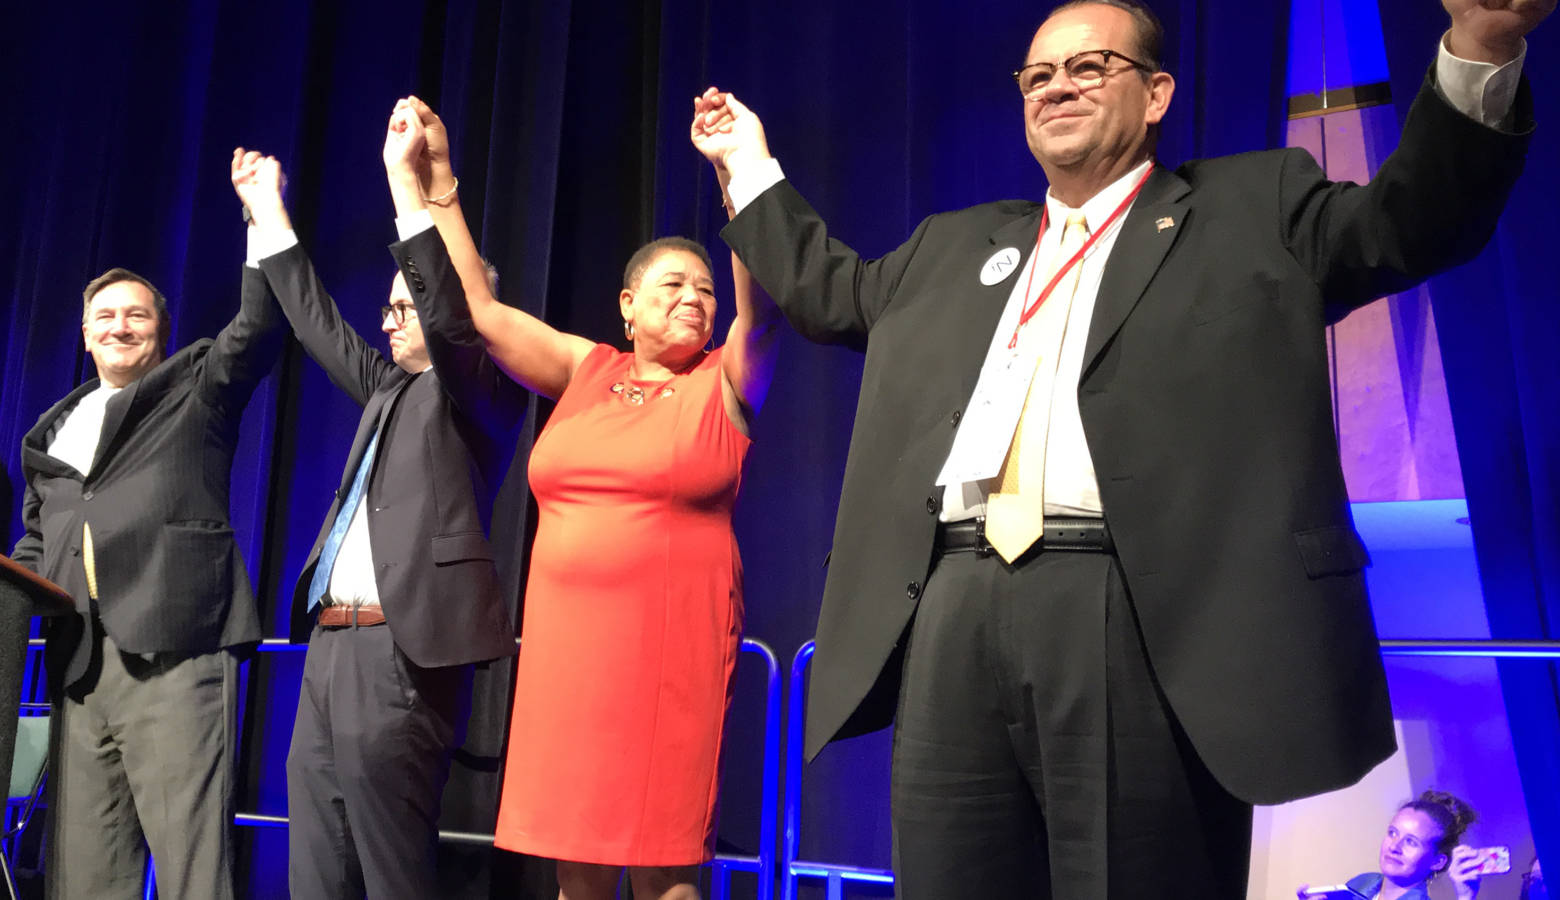 Indiana Democrats running statewide in 2018: from left, Sen. Joe Donnelly (D-Ind.), Secretary of State candidate Jim Harper, State Auditor candidate Joselyn Whitticker, and State Treasurer candidate John Aguilera. (Brandon Smith/IPB News)